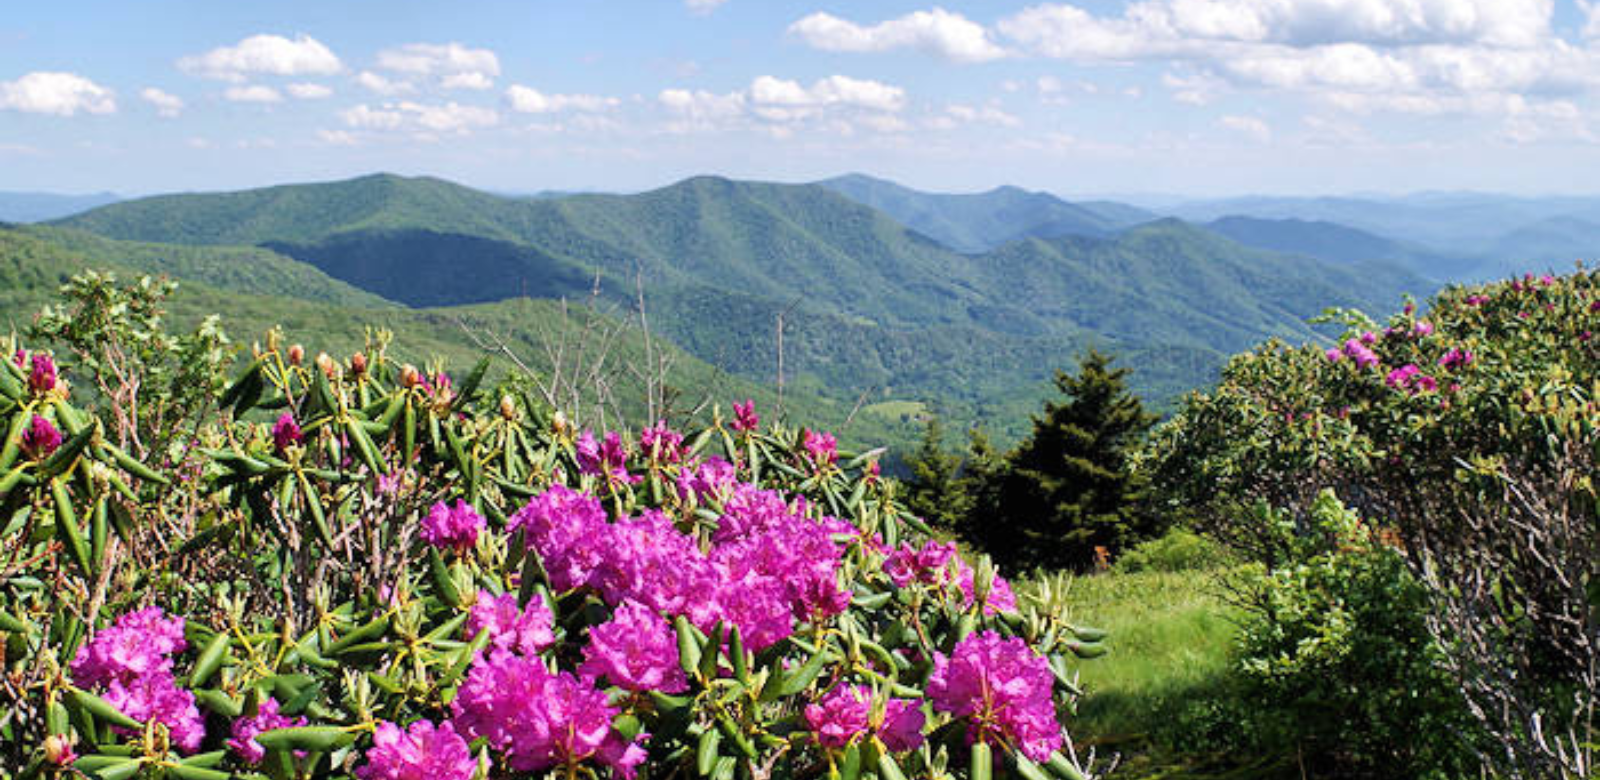 Hike Roan Mountain's 5-mile ridgeline near our RV Campground